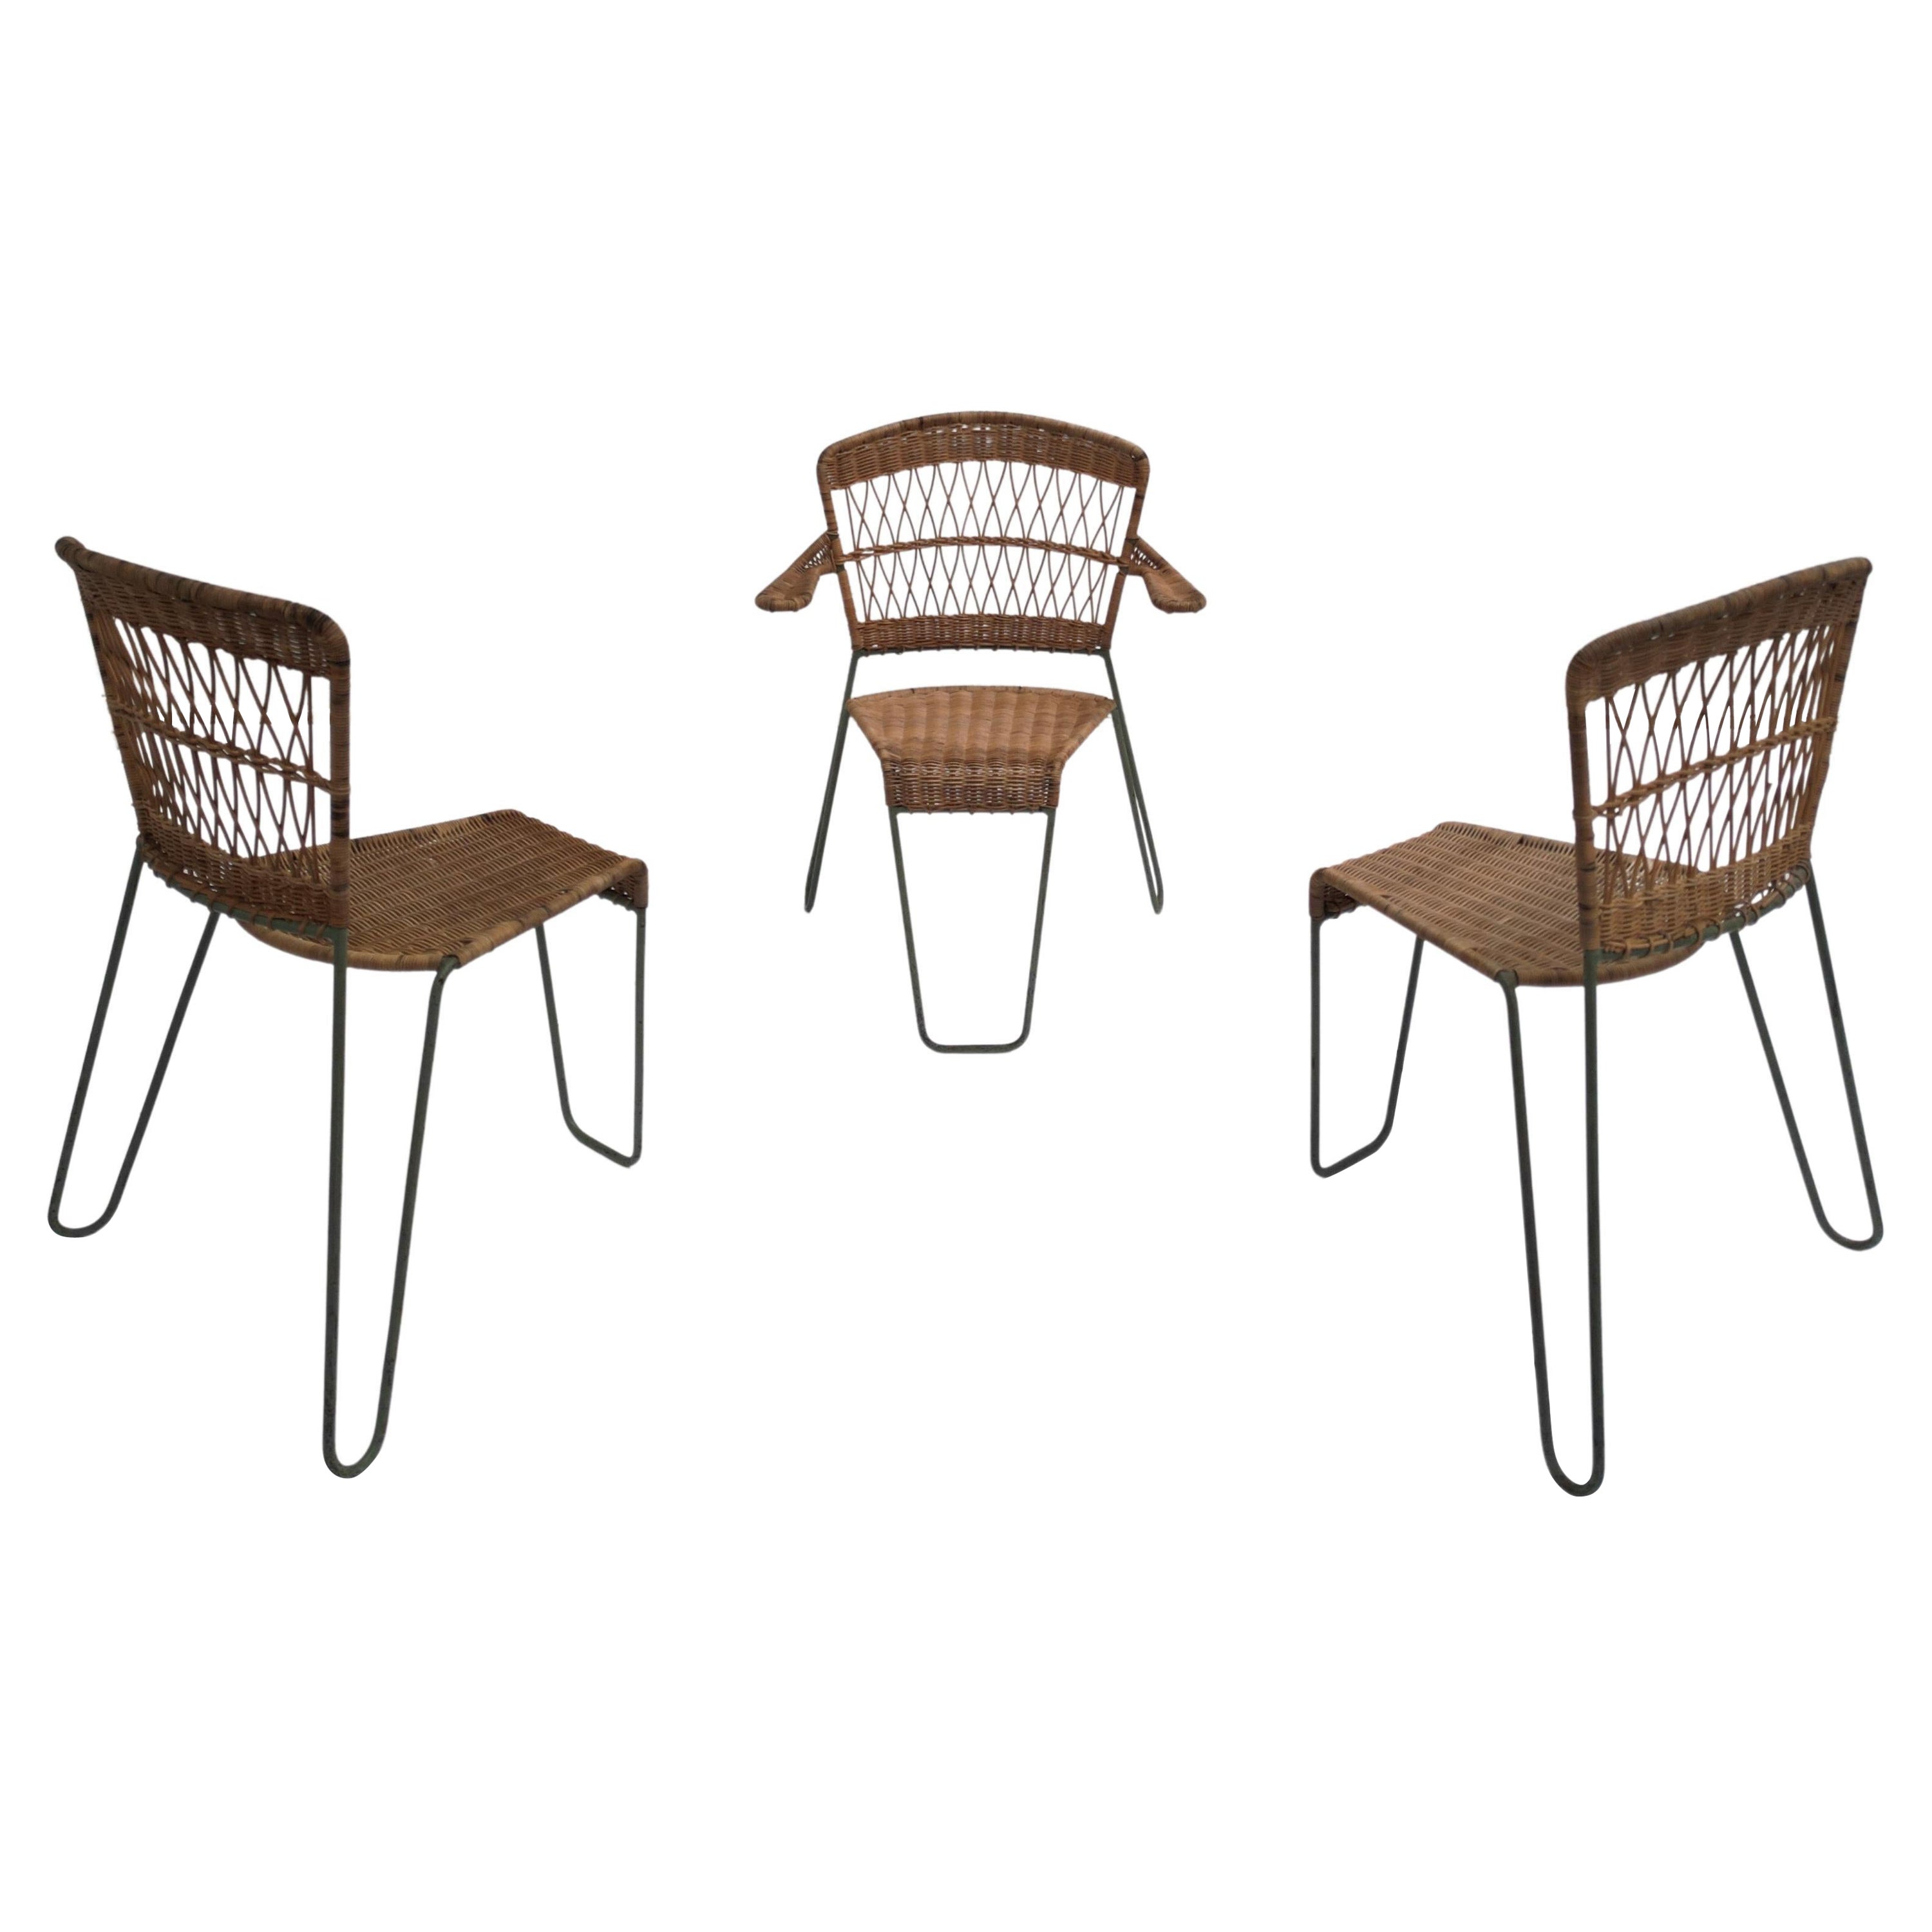 3 Sculptural Form 'Oro' Dining Chairs by Raoul Guys, 1951, Airborne, France